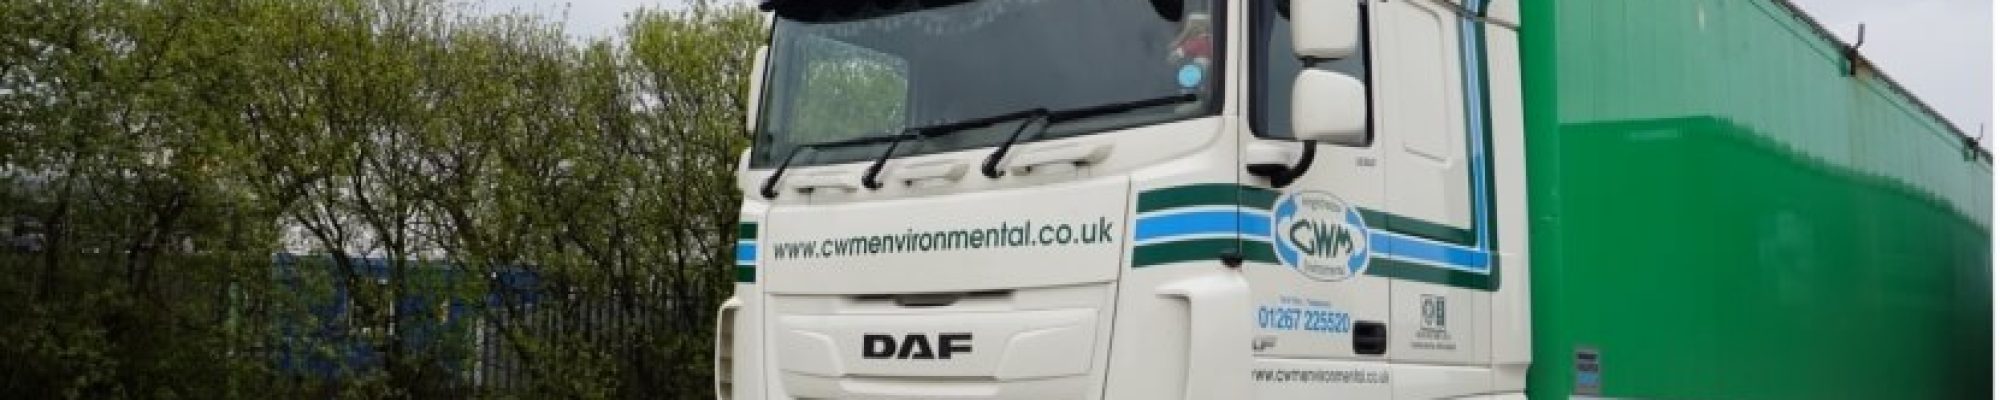 CWM arctic lorry with a white cab and green trailer